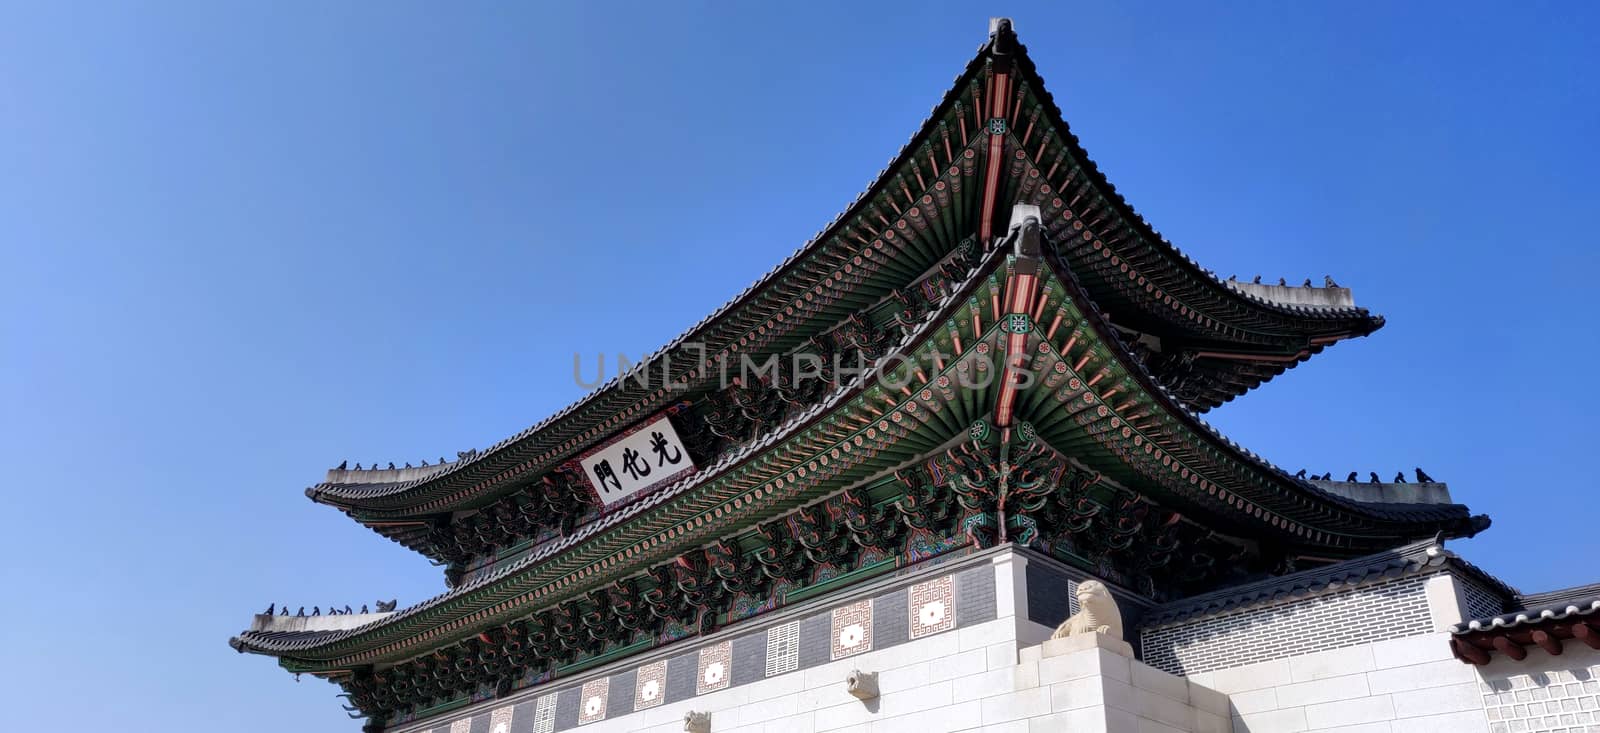 ancient Palace in Seoul, Korea against blue sky in bright day